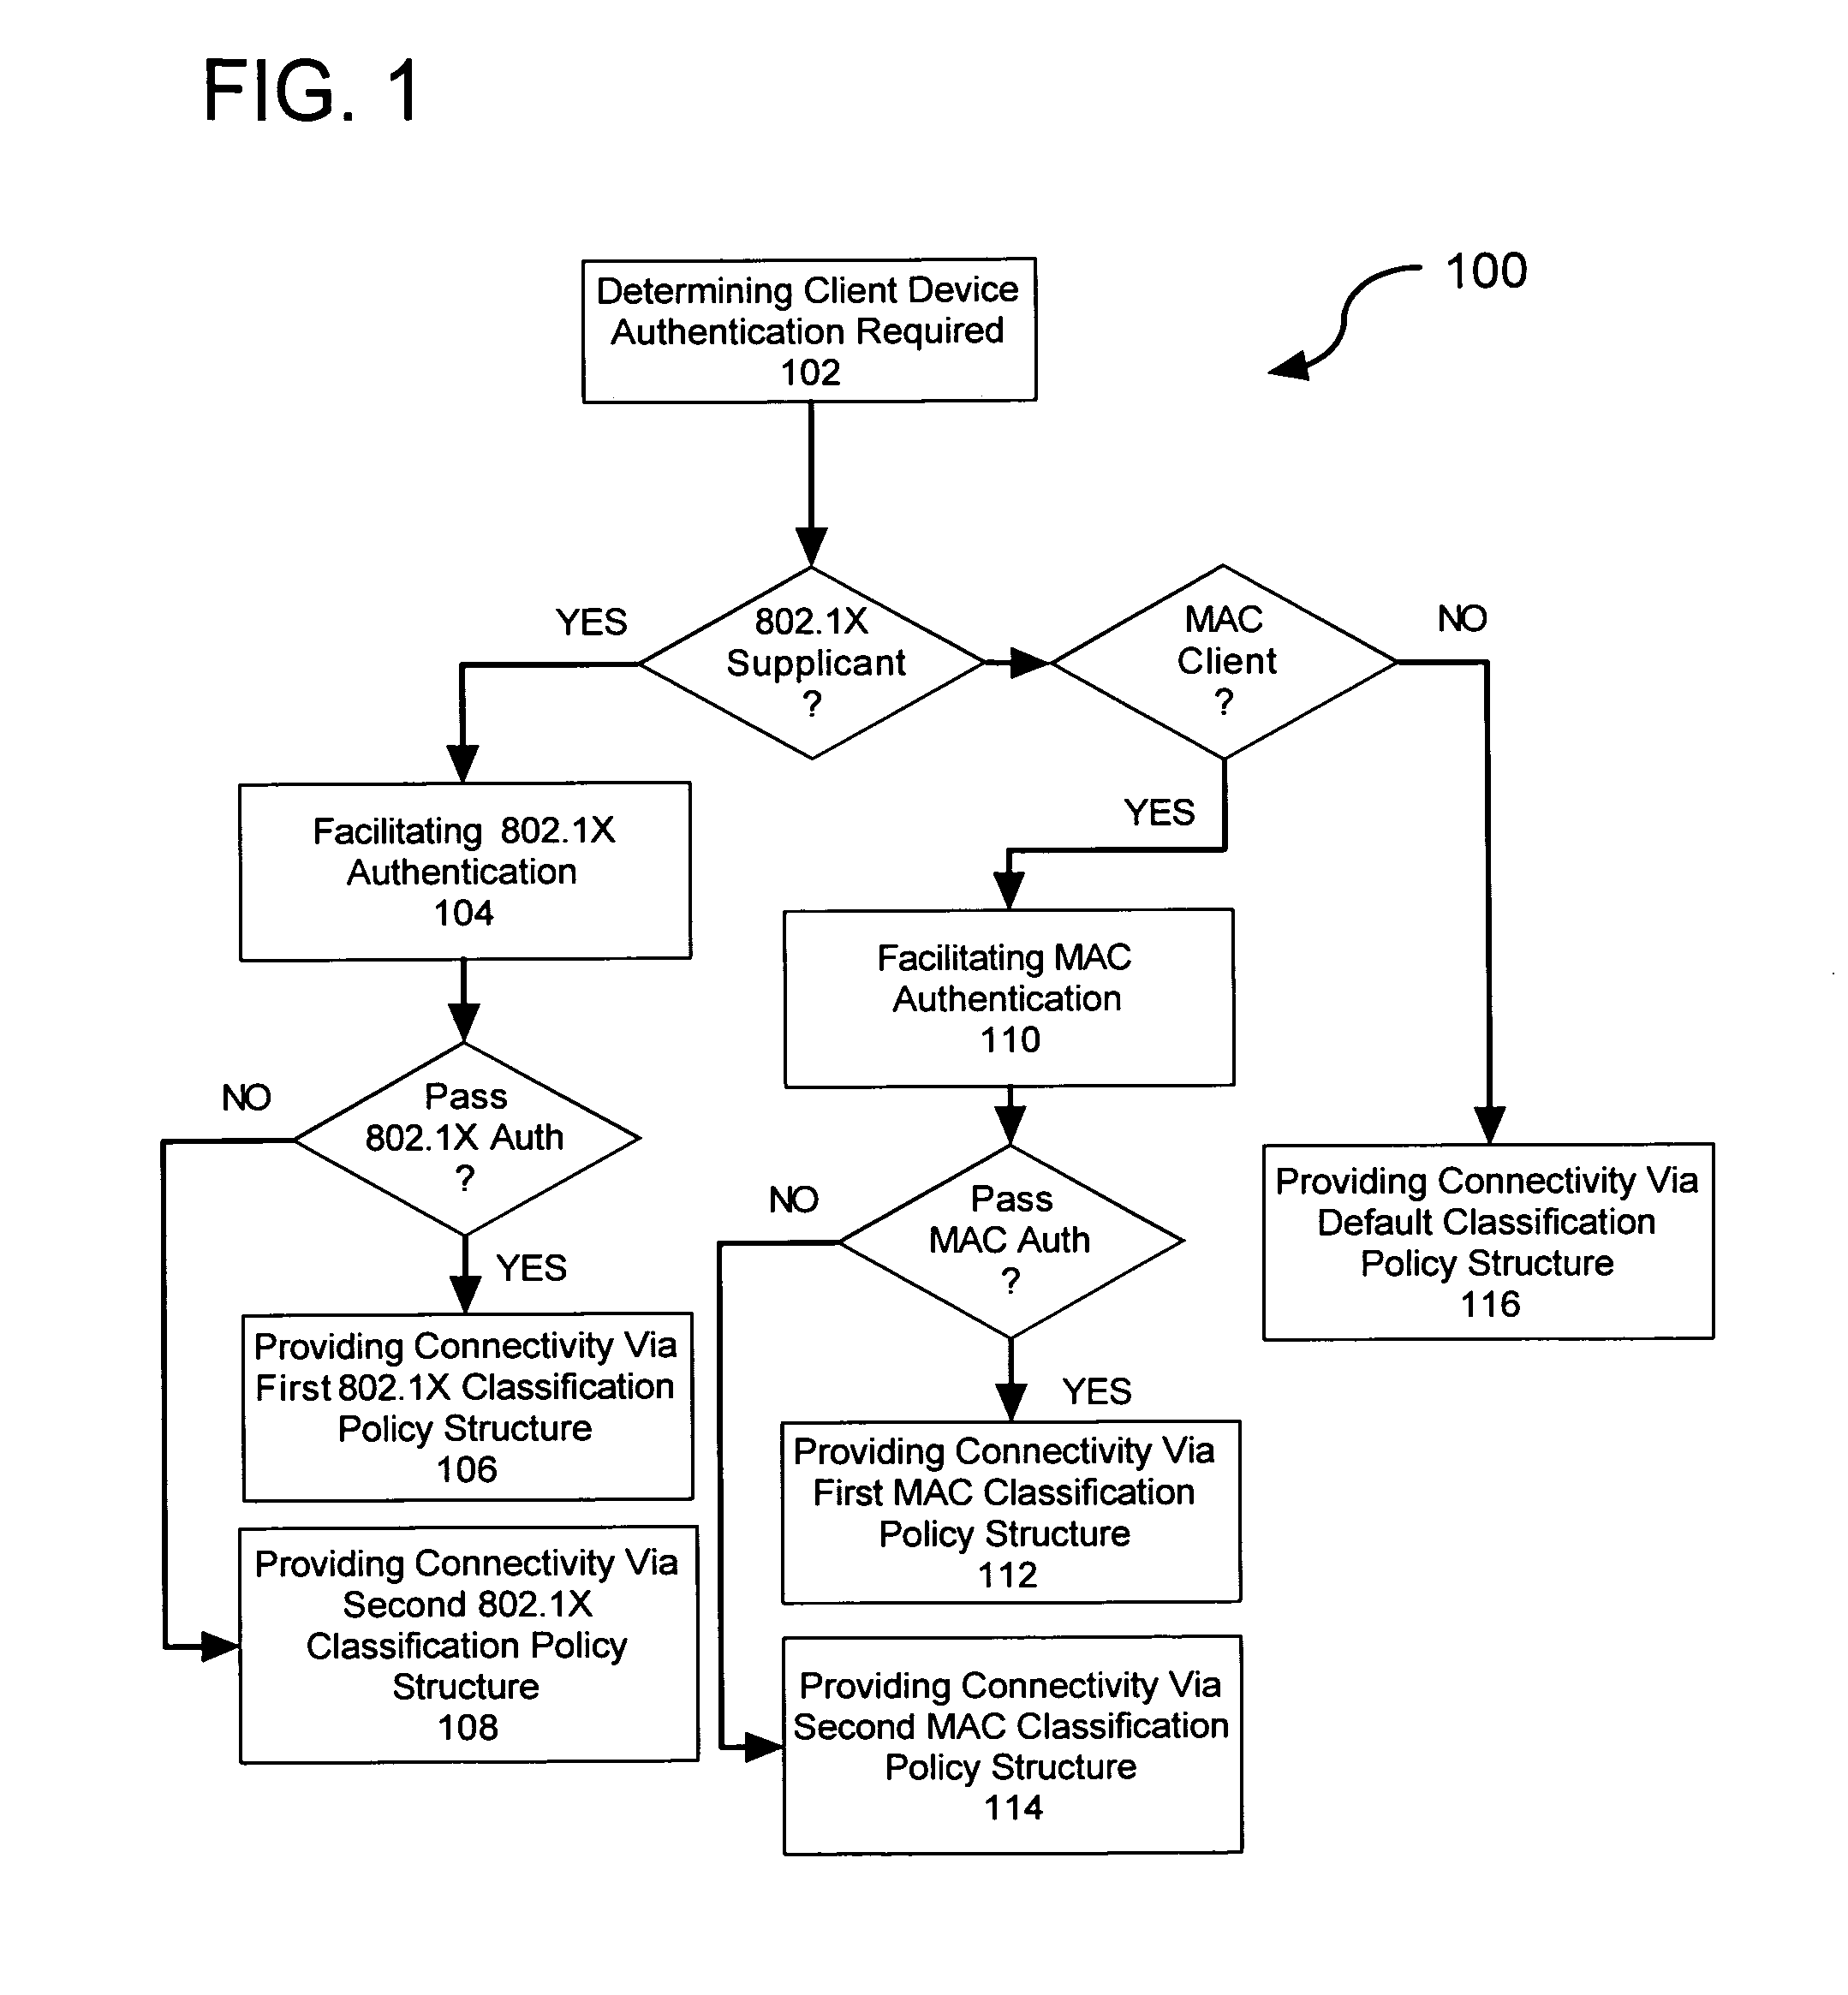 Facilitating heterogeneous authentication for allowing network access